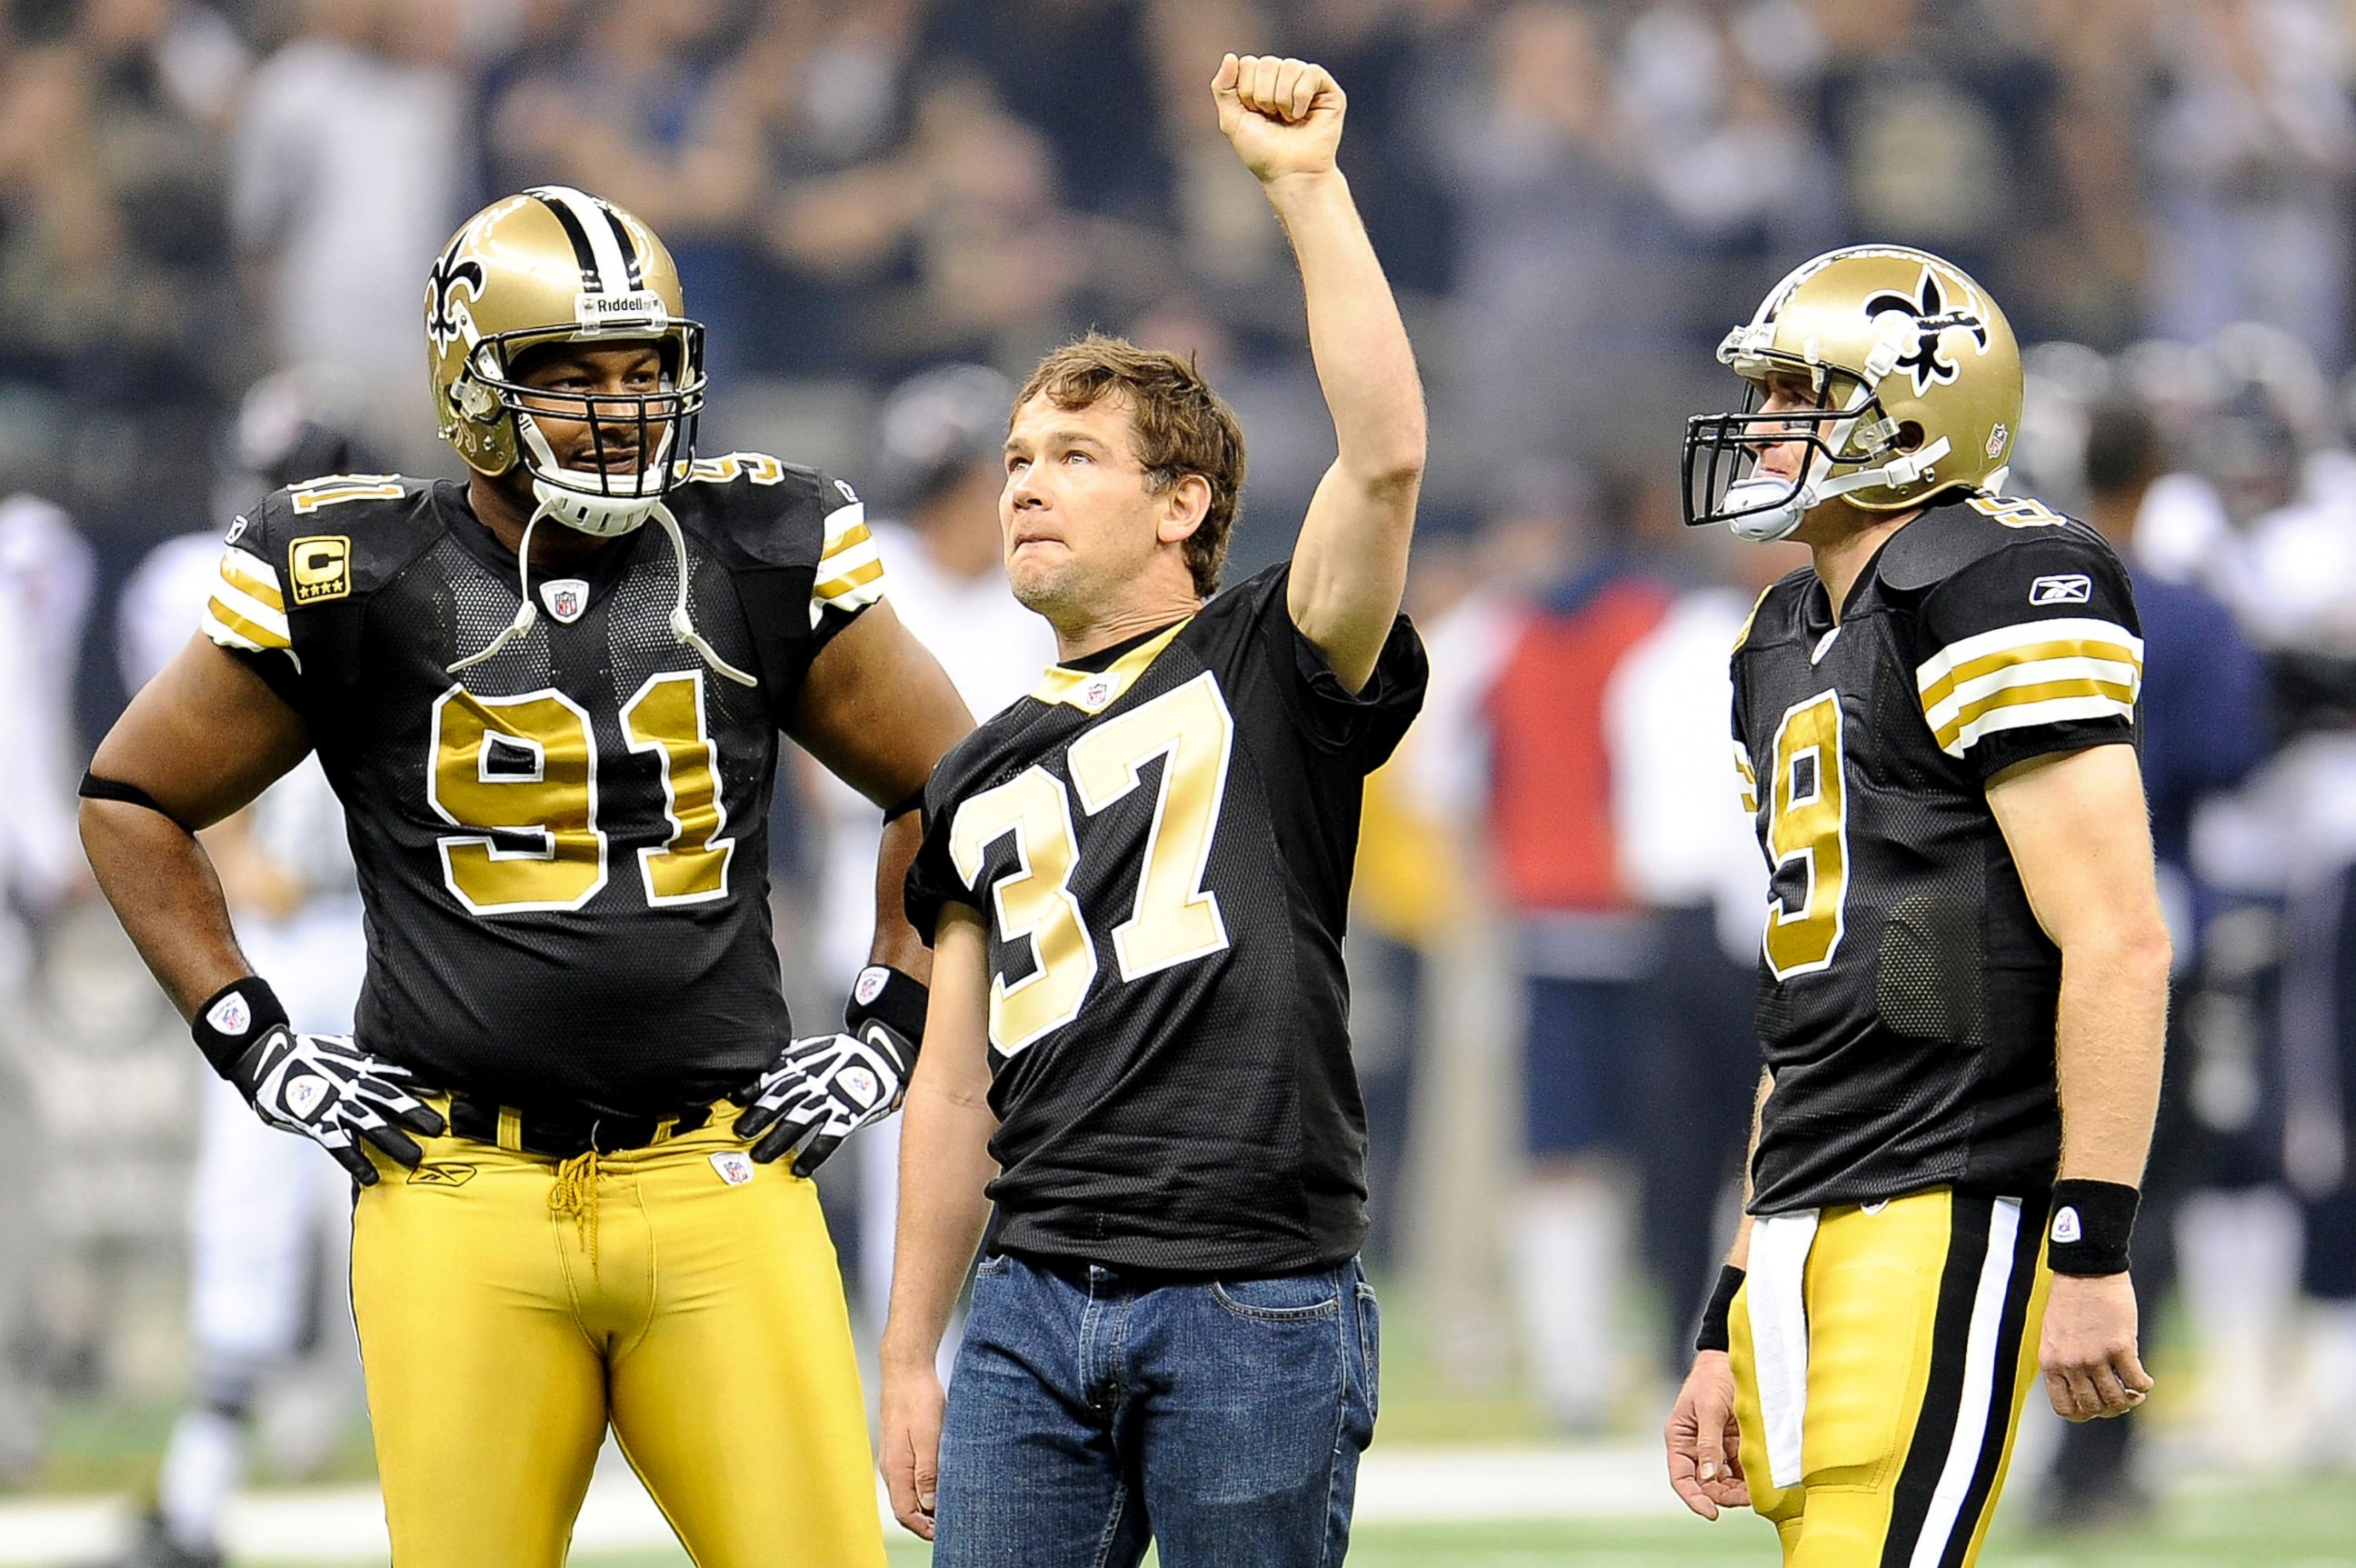 PHOTO: Will Smith #91 and Drew Brees #9 of the New Orleans Saints stand with former Saint Steve Gleason during a game at the Louisiana Superdome, Sept. 25, 2011, in New Orleans, Louisiana.